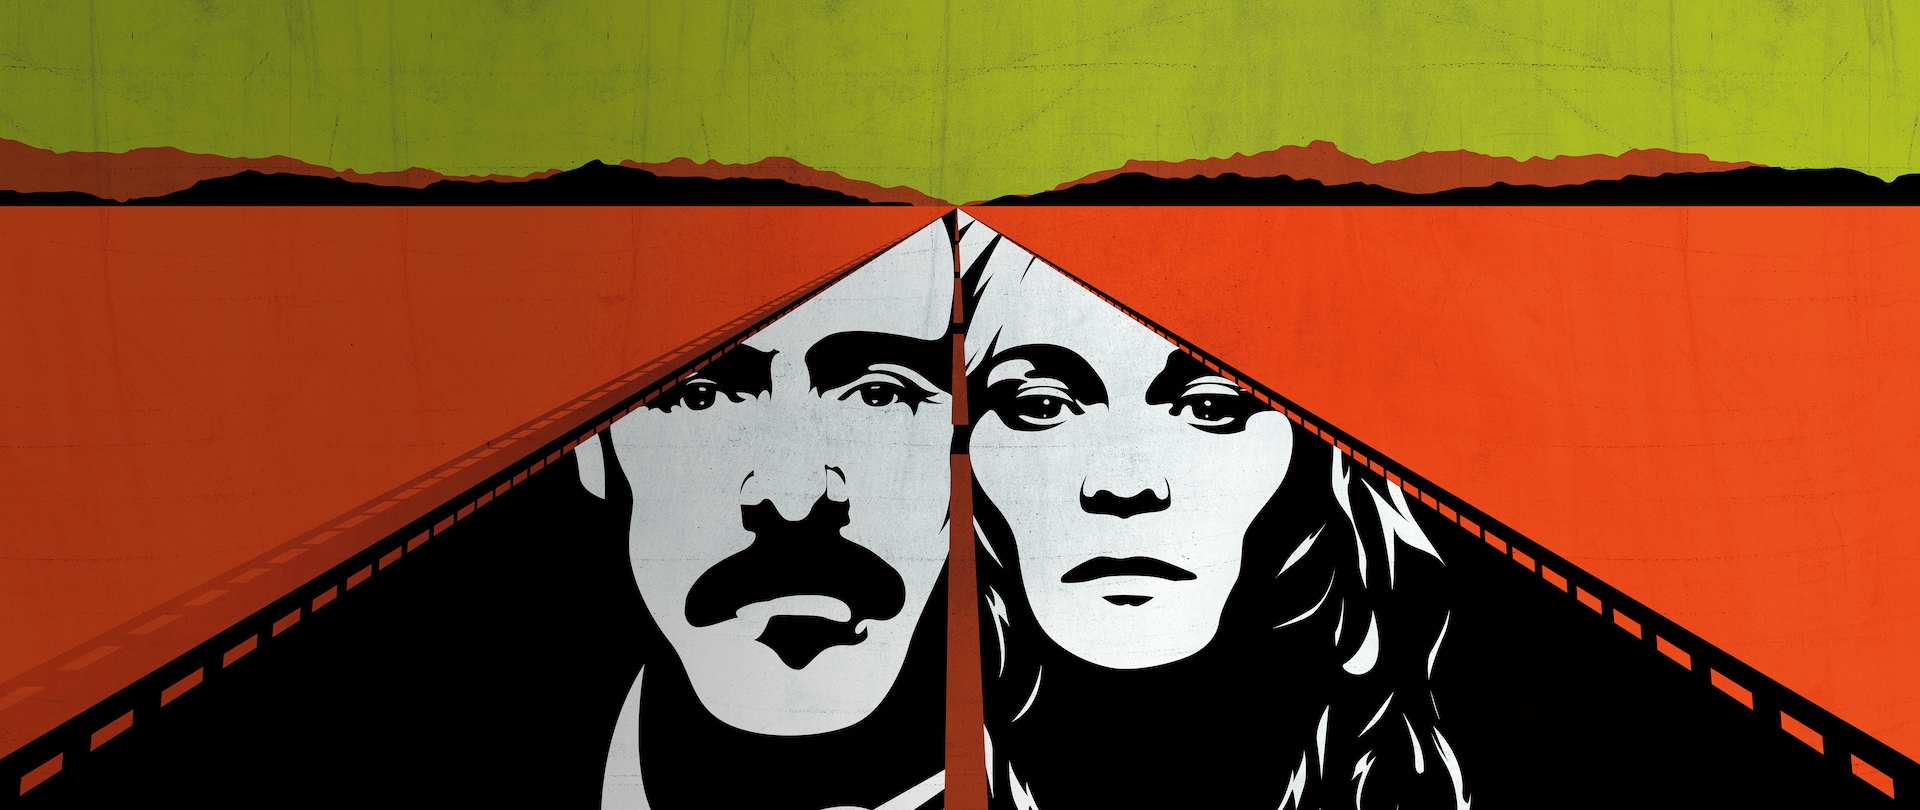 A detective man and woman's faces from The Bridge in a black pop art style in the road of a cartoon orange desert